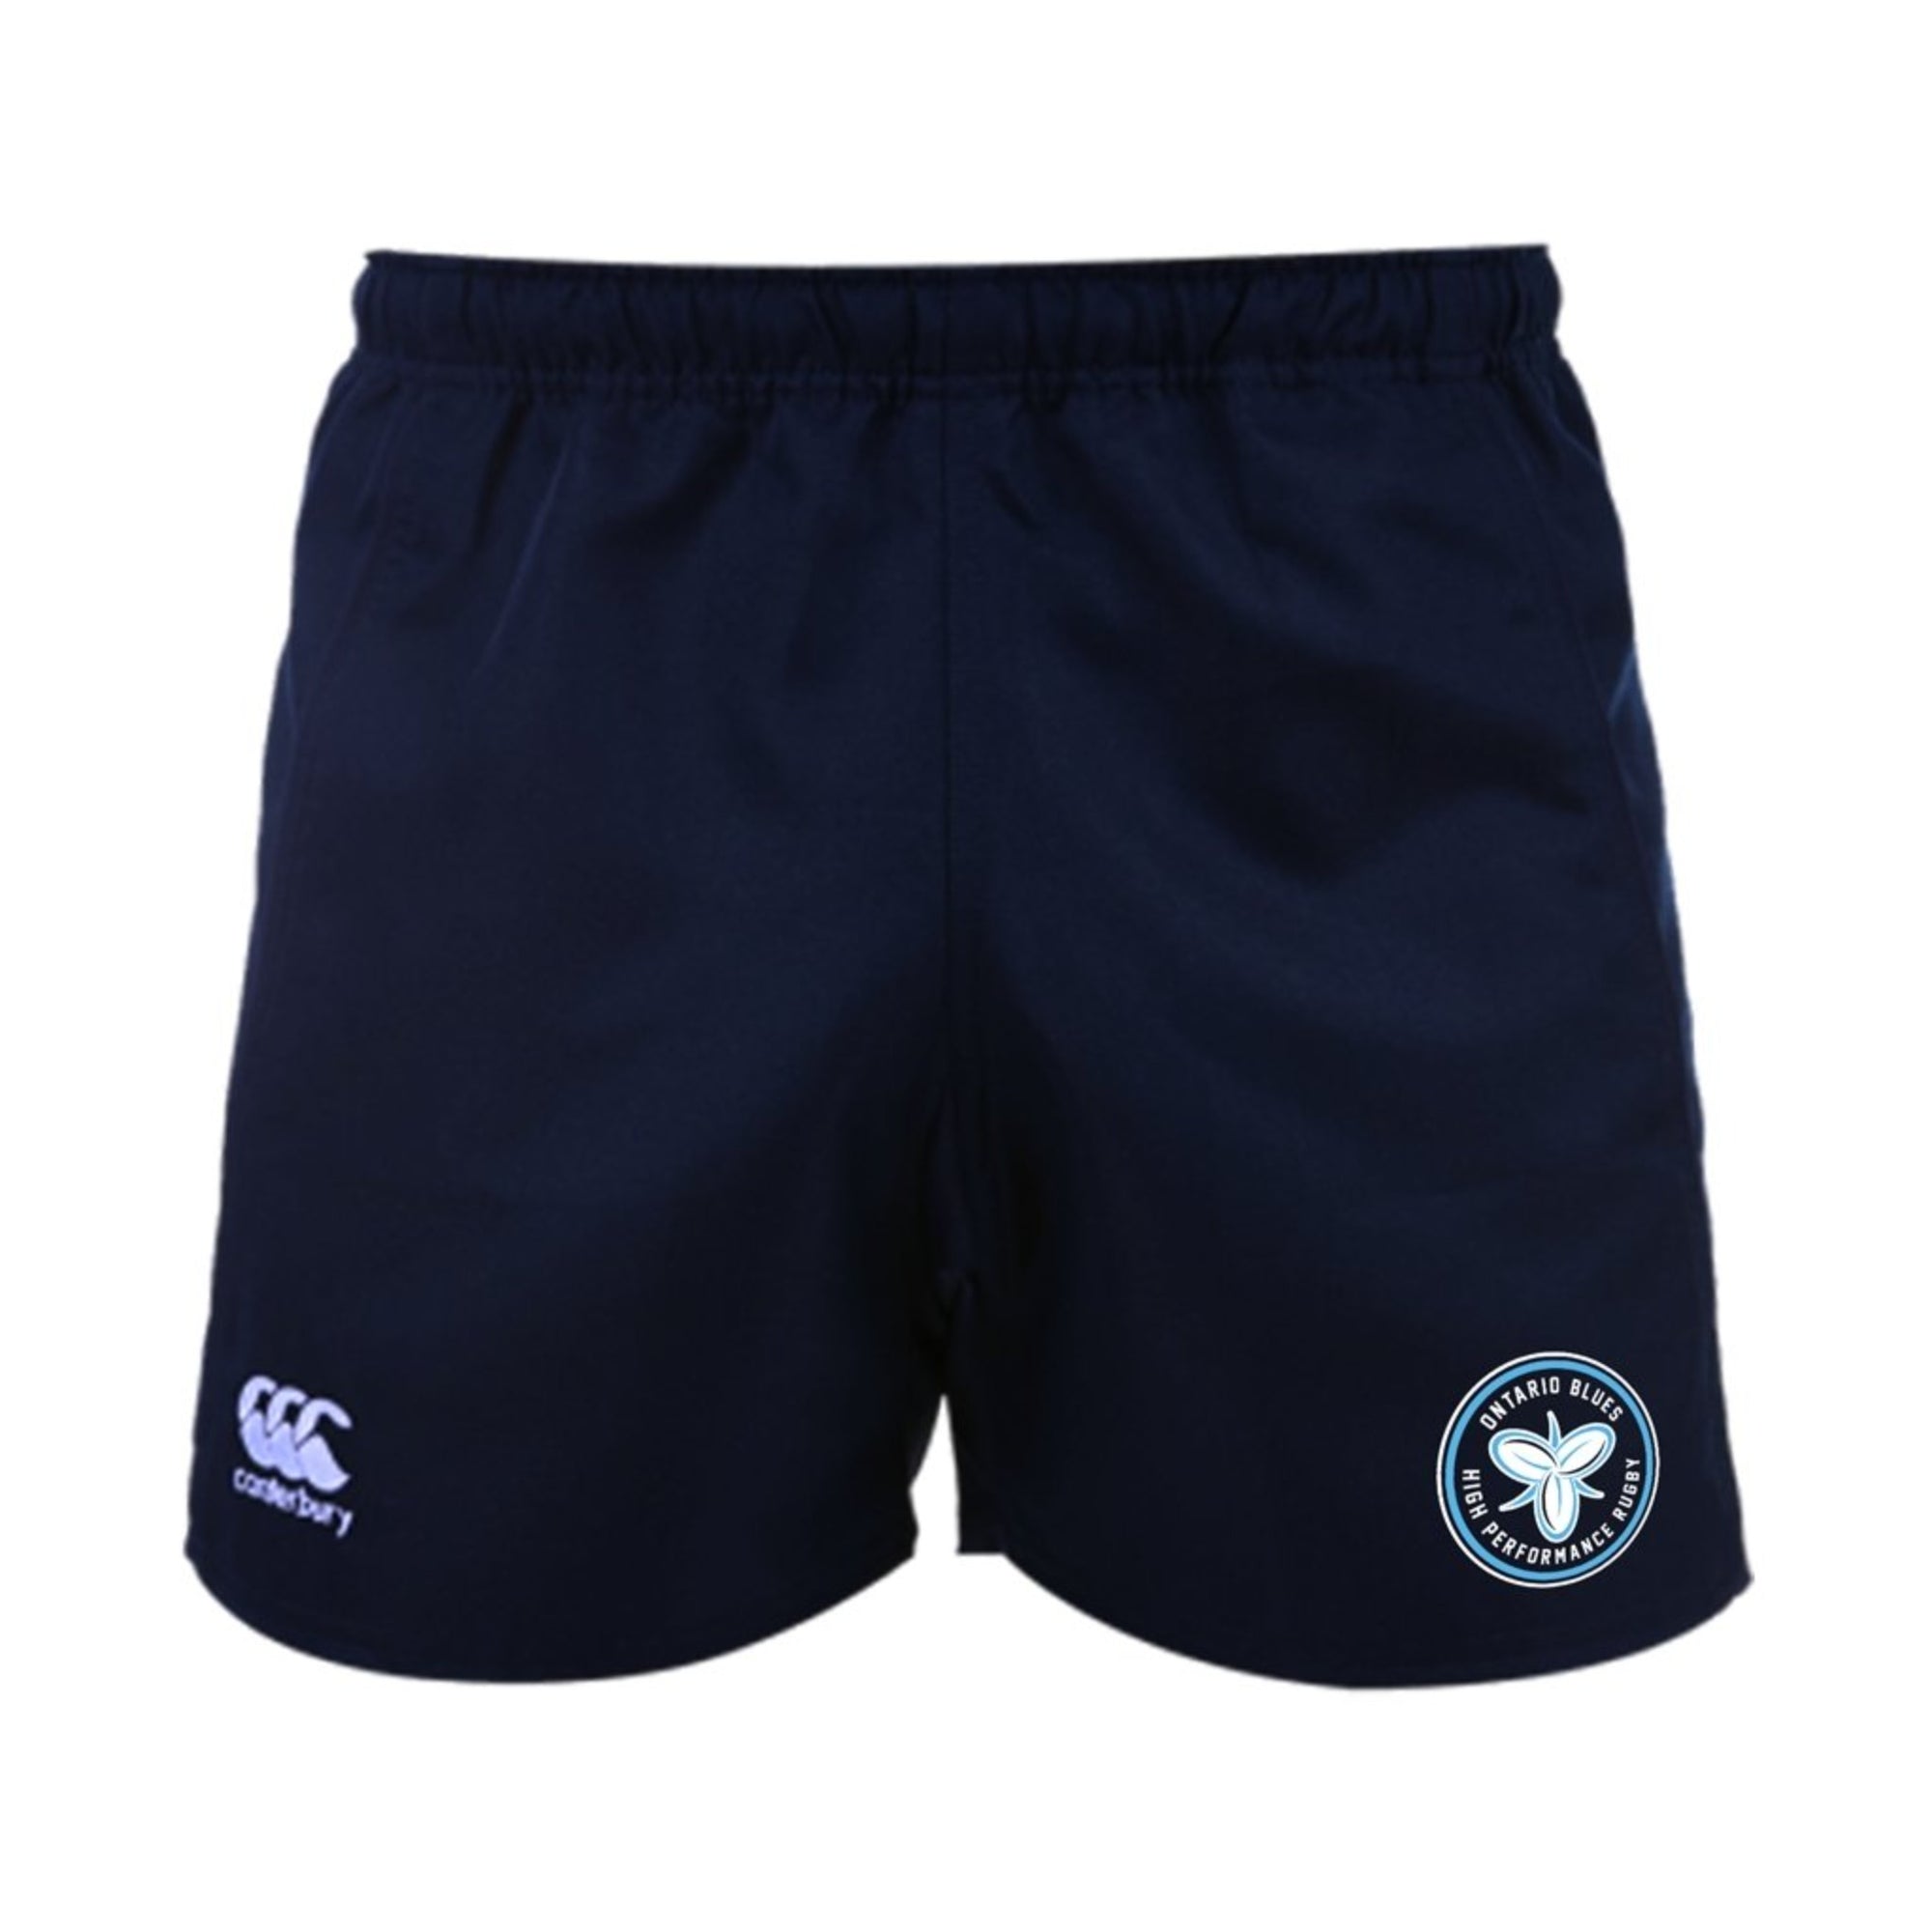 Ontario Blues CCC Pro-Poly Pocketed Shorts - www.therugbyshop.com www.therugbyshop.com MEN'S / NAVY / XS TRS Distribution Canada SHORTS Ontario Blues CCC Pro-Poly Pocketed Shorts